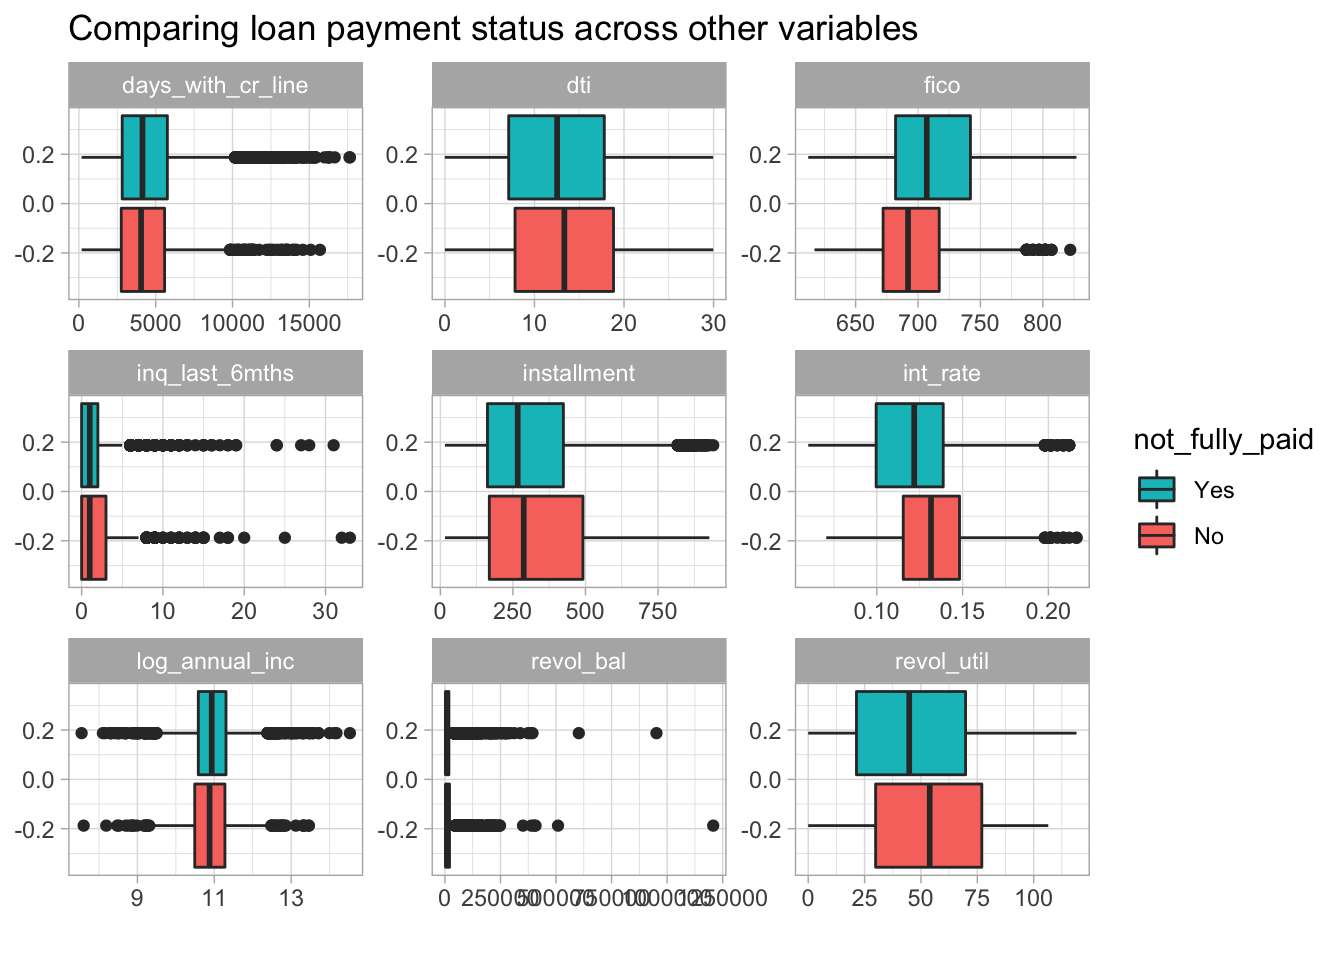 Boxplots comparing fully paid and not fully paid across numeric variables